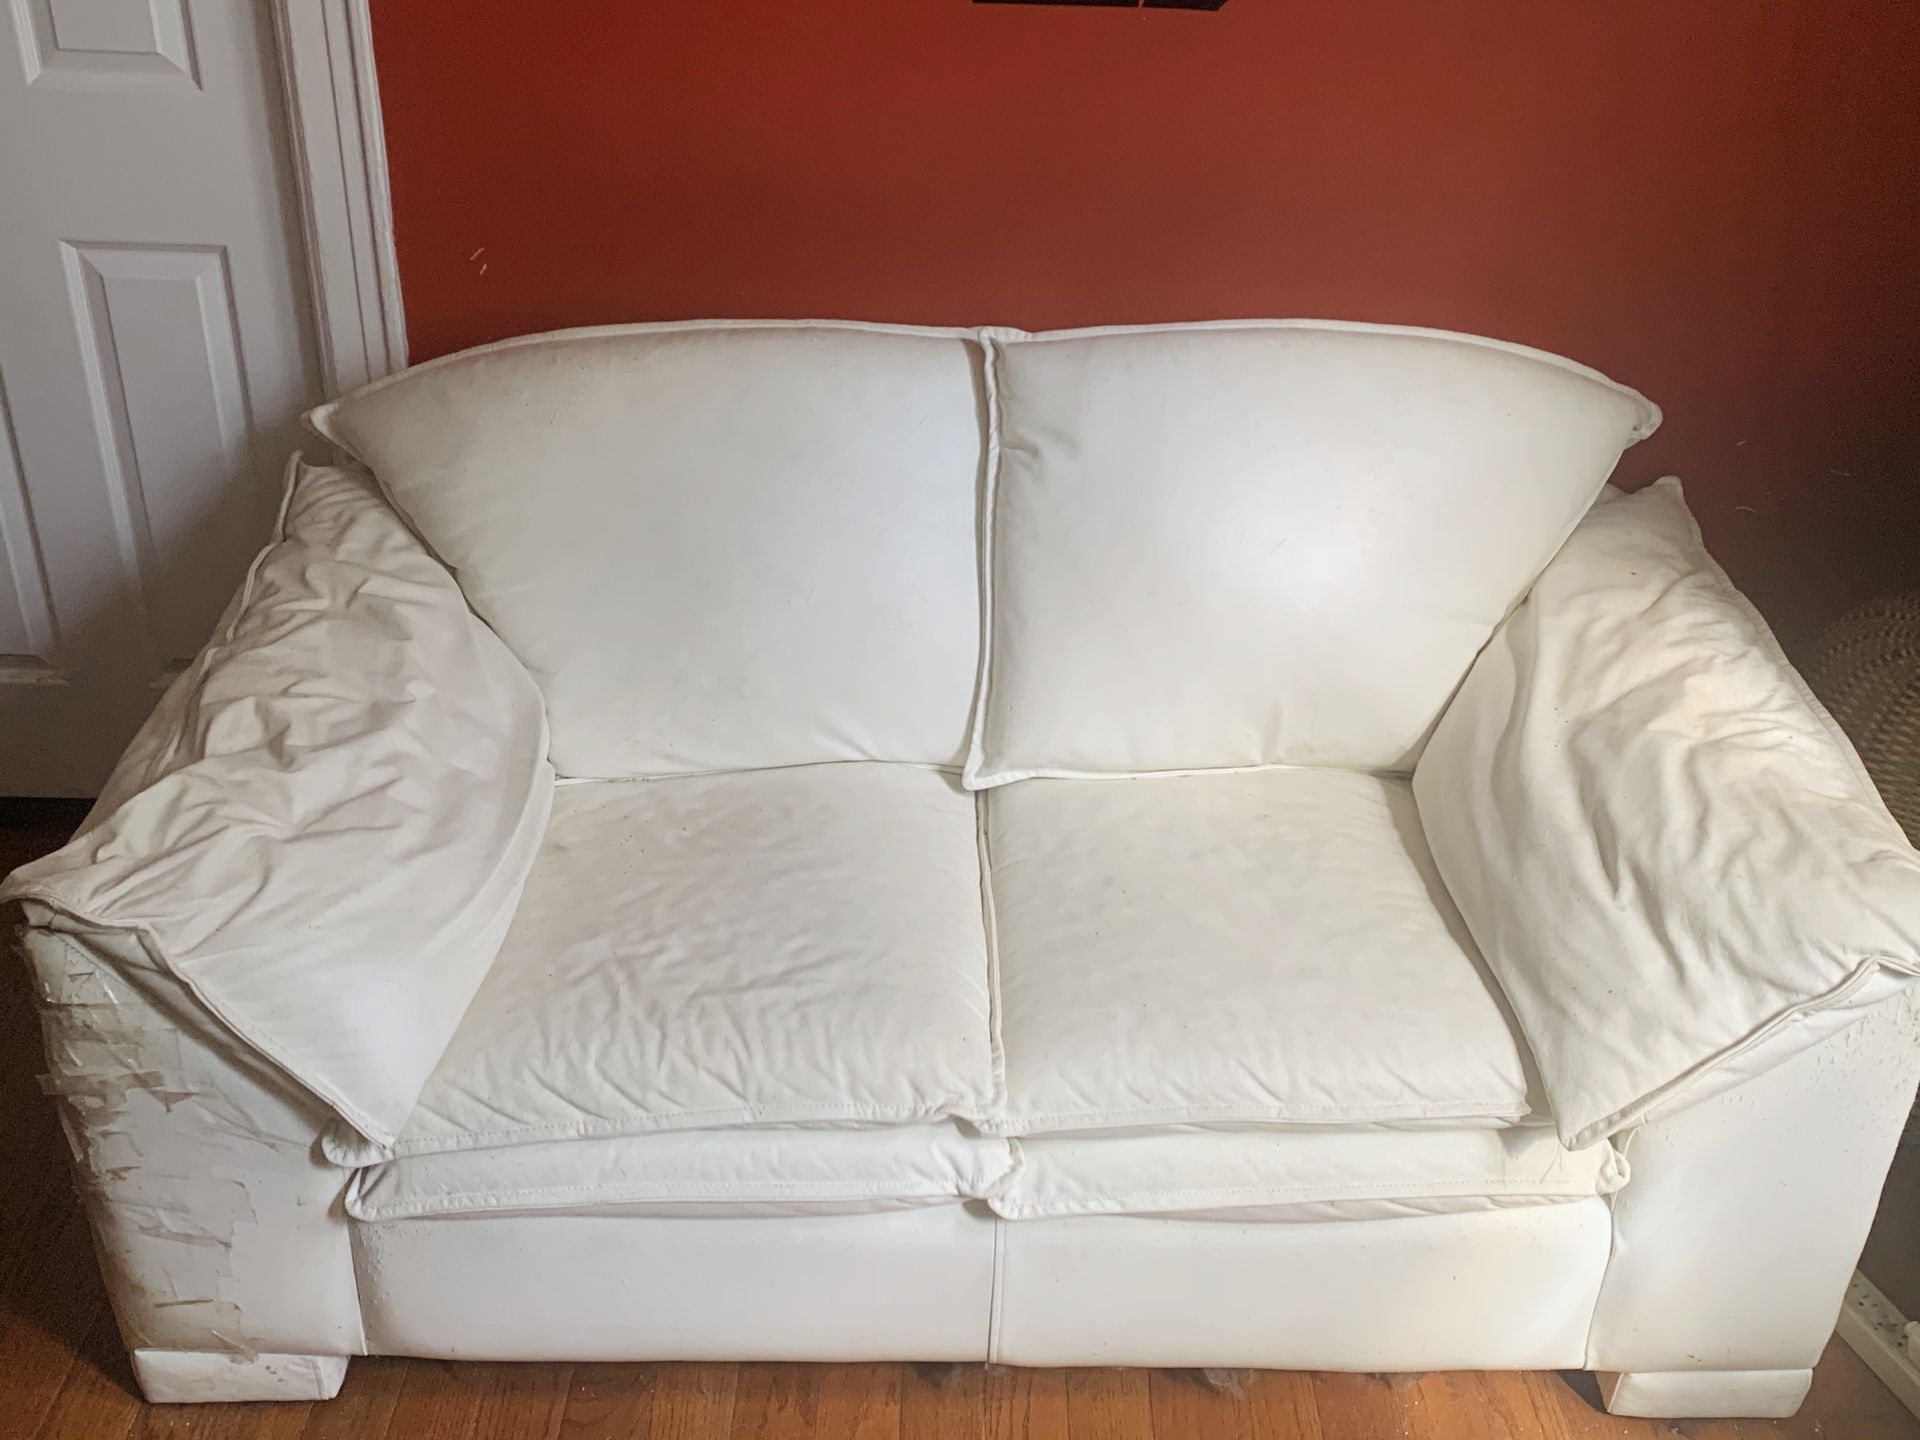 Real genuine white leather Maurice Villency loveseat couch 🛋 for sale